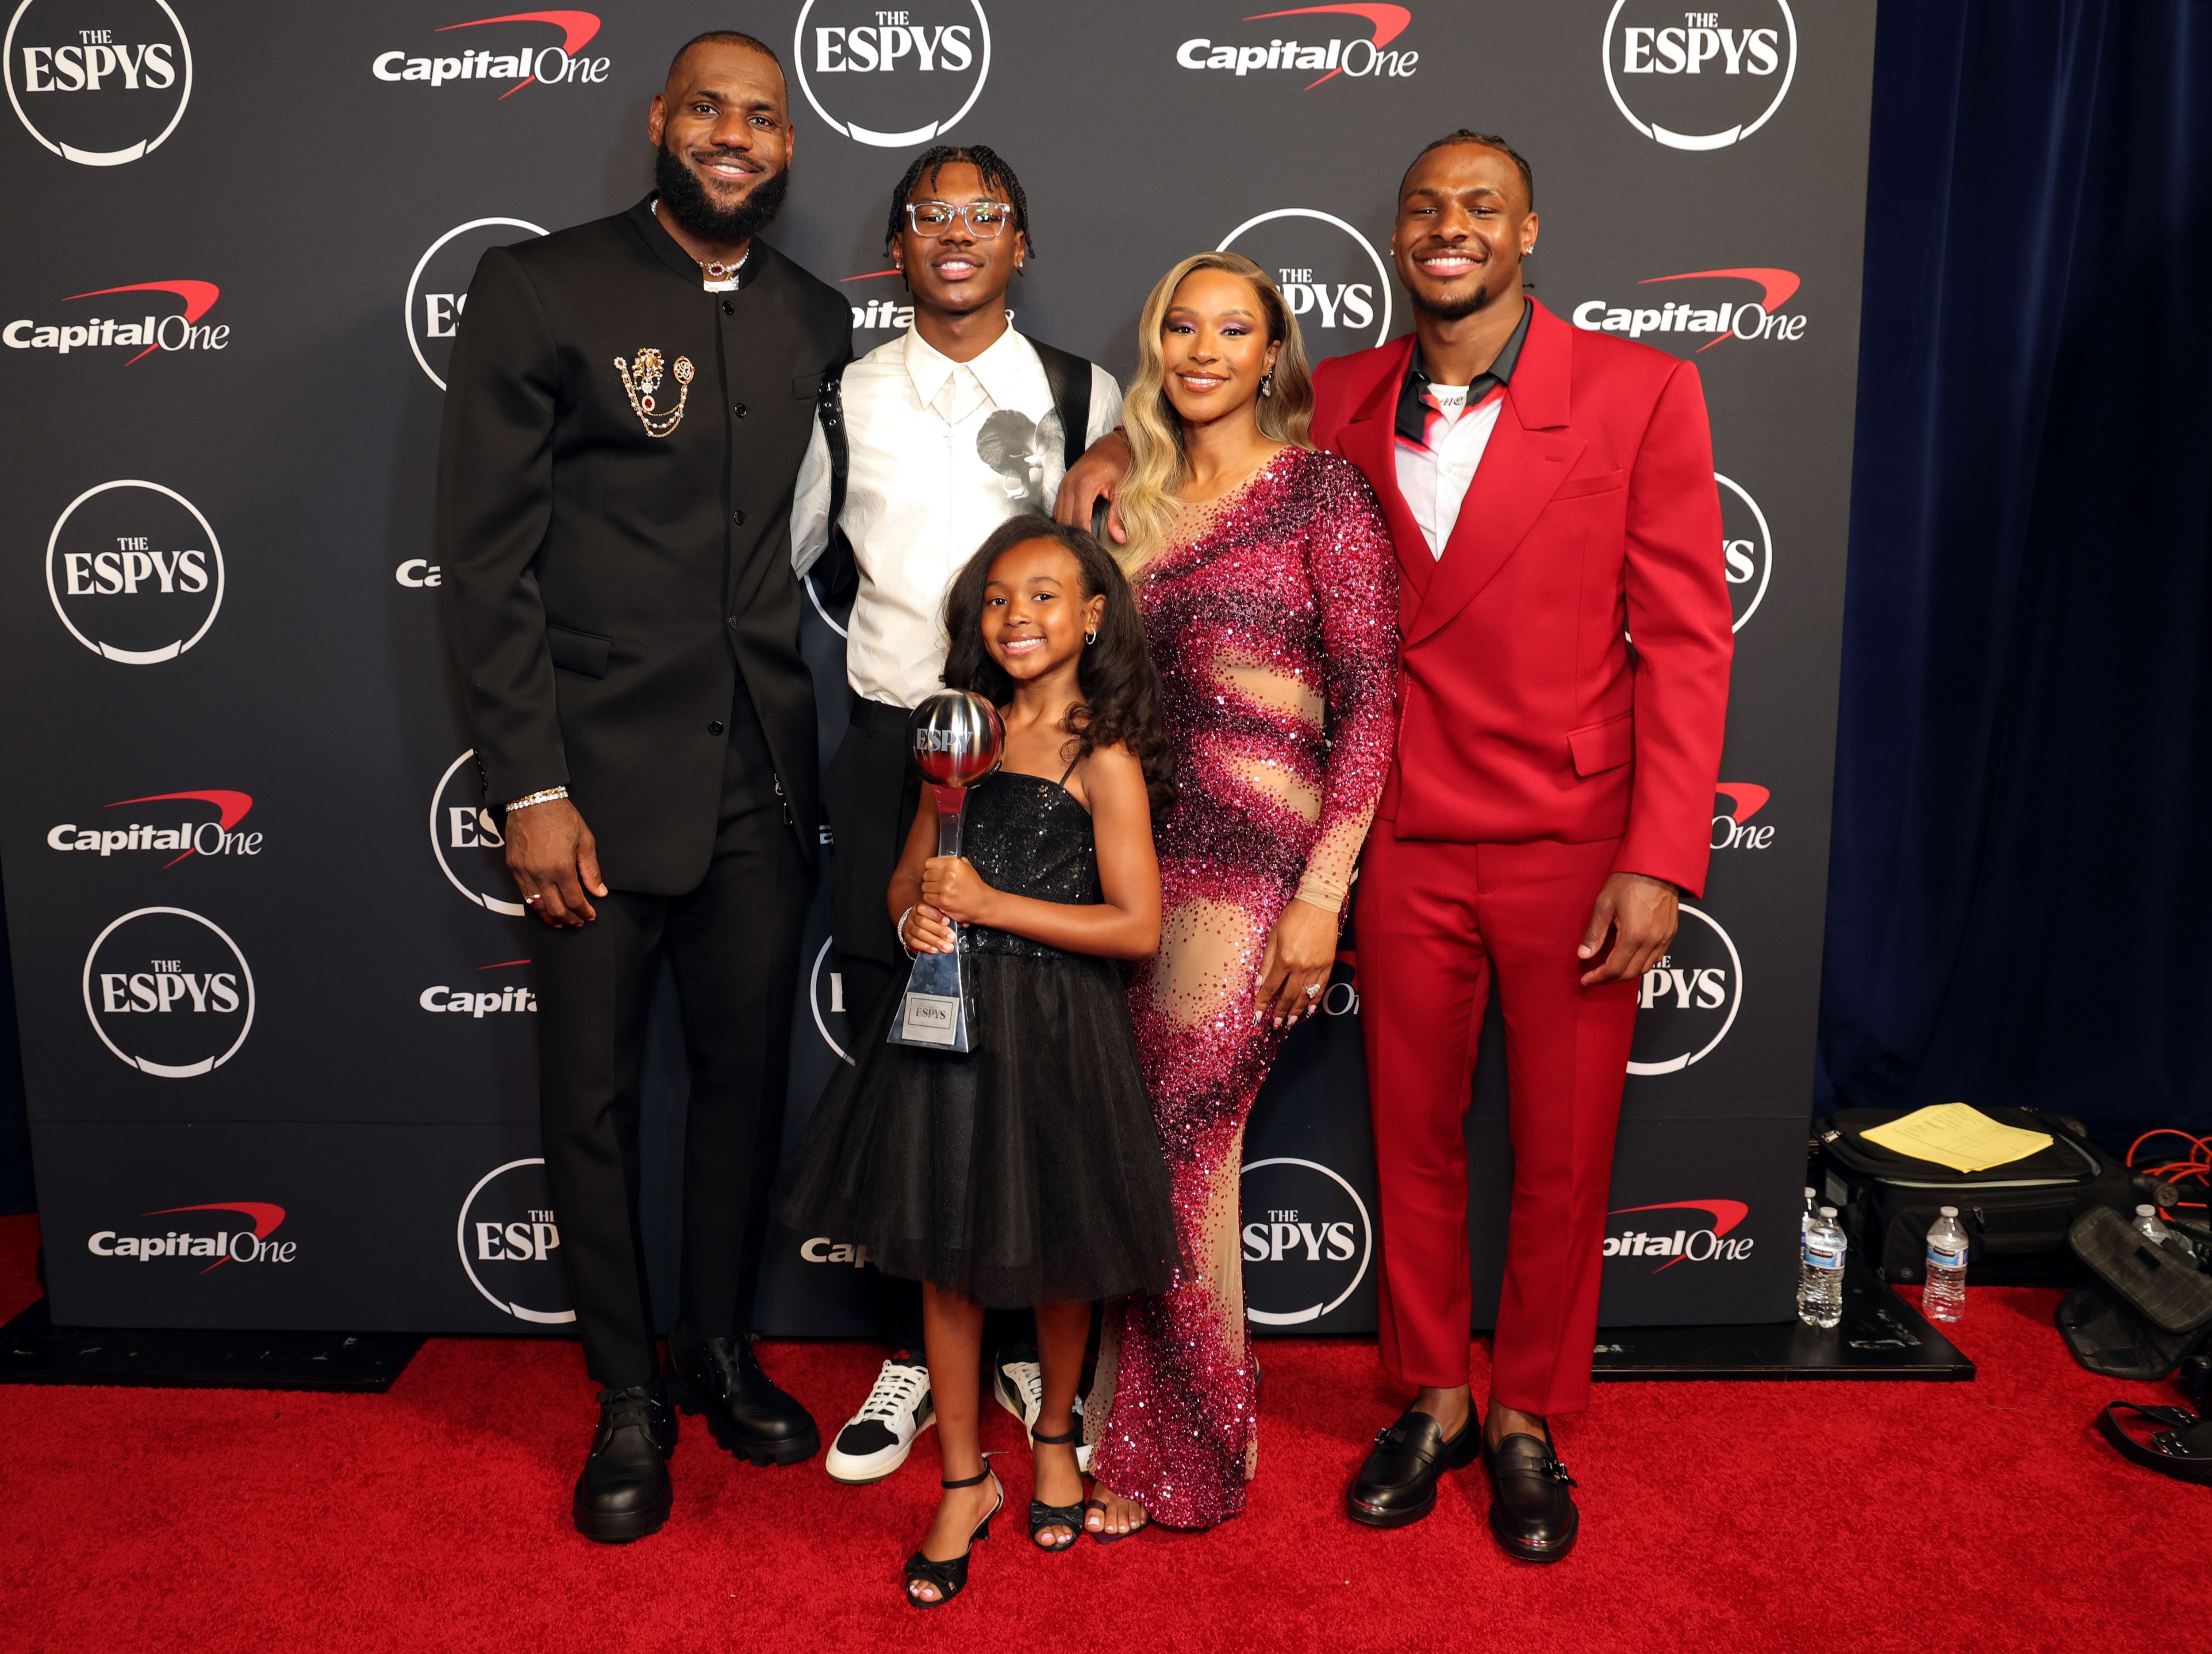 ESPYs: The best outfits from the 2023 red carpet